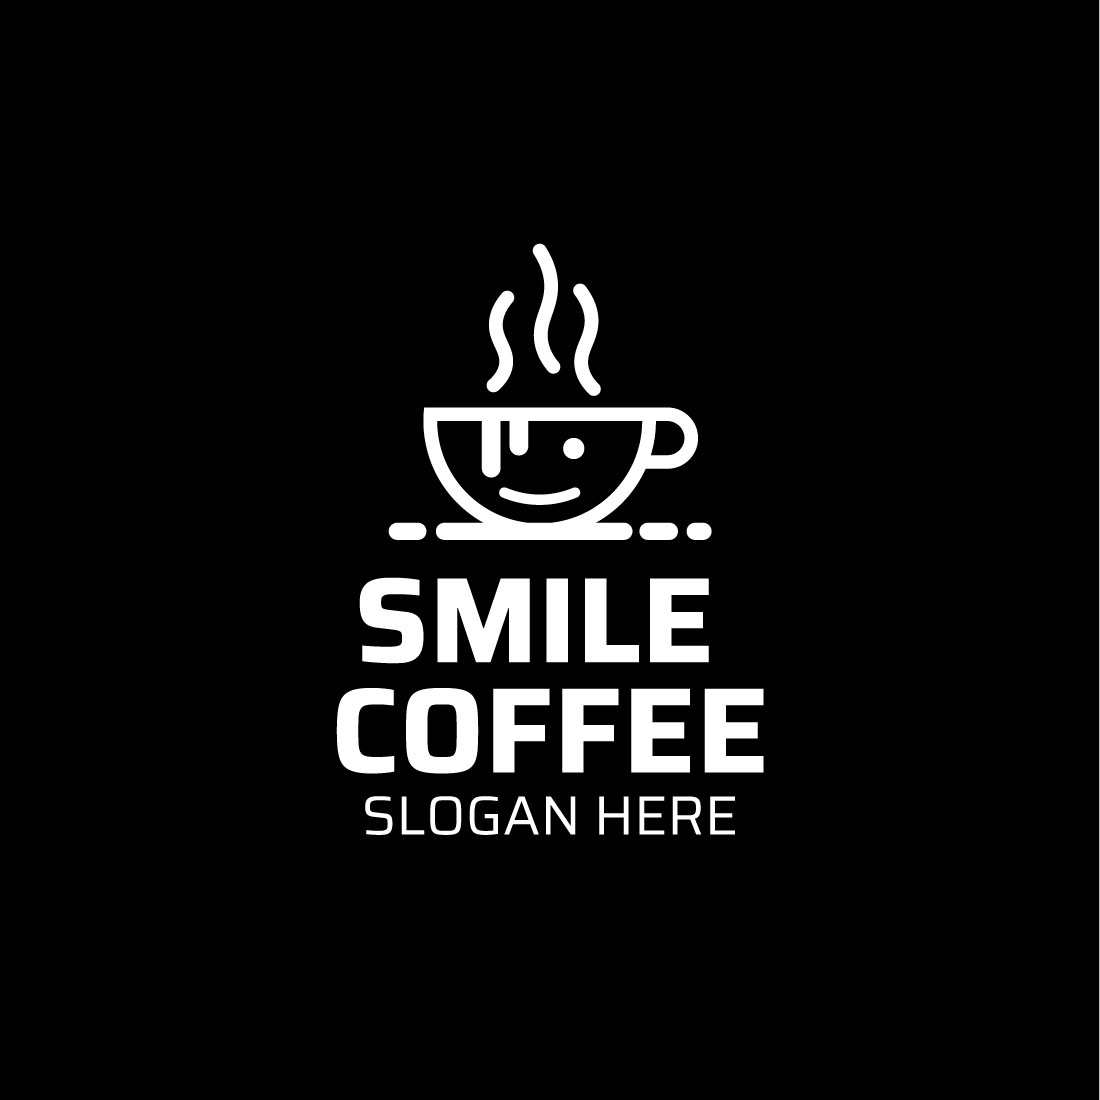 Coffee cup smile logo design vector cover image.